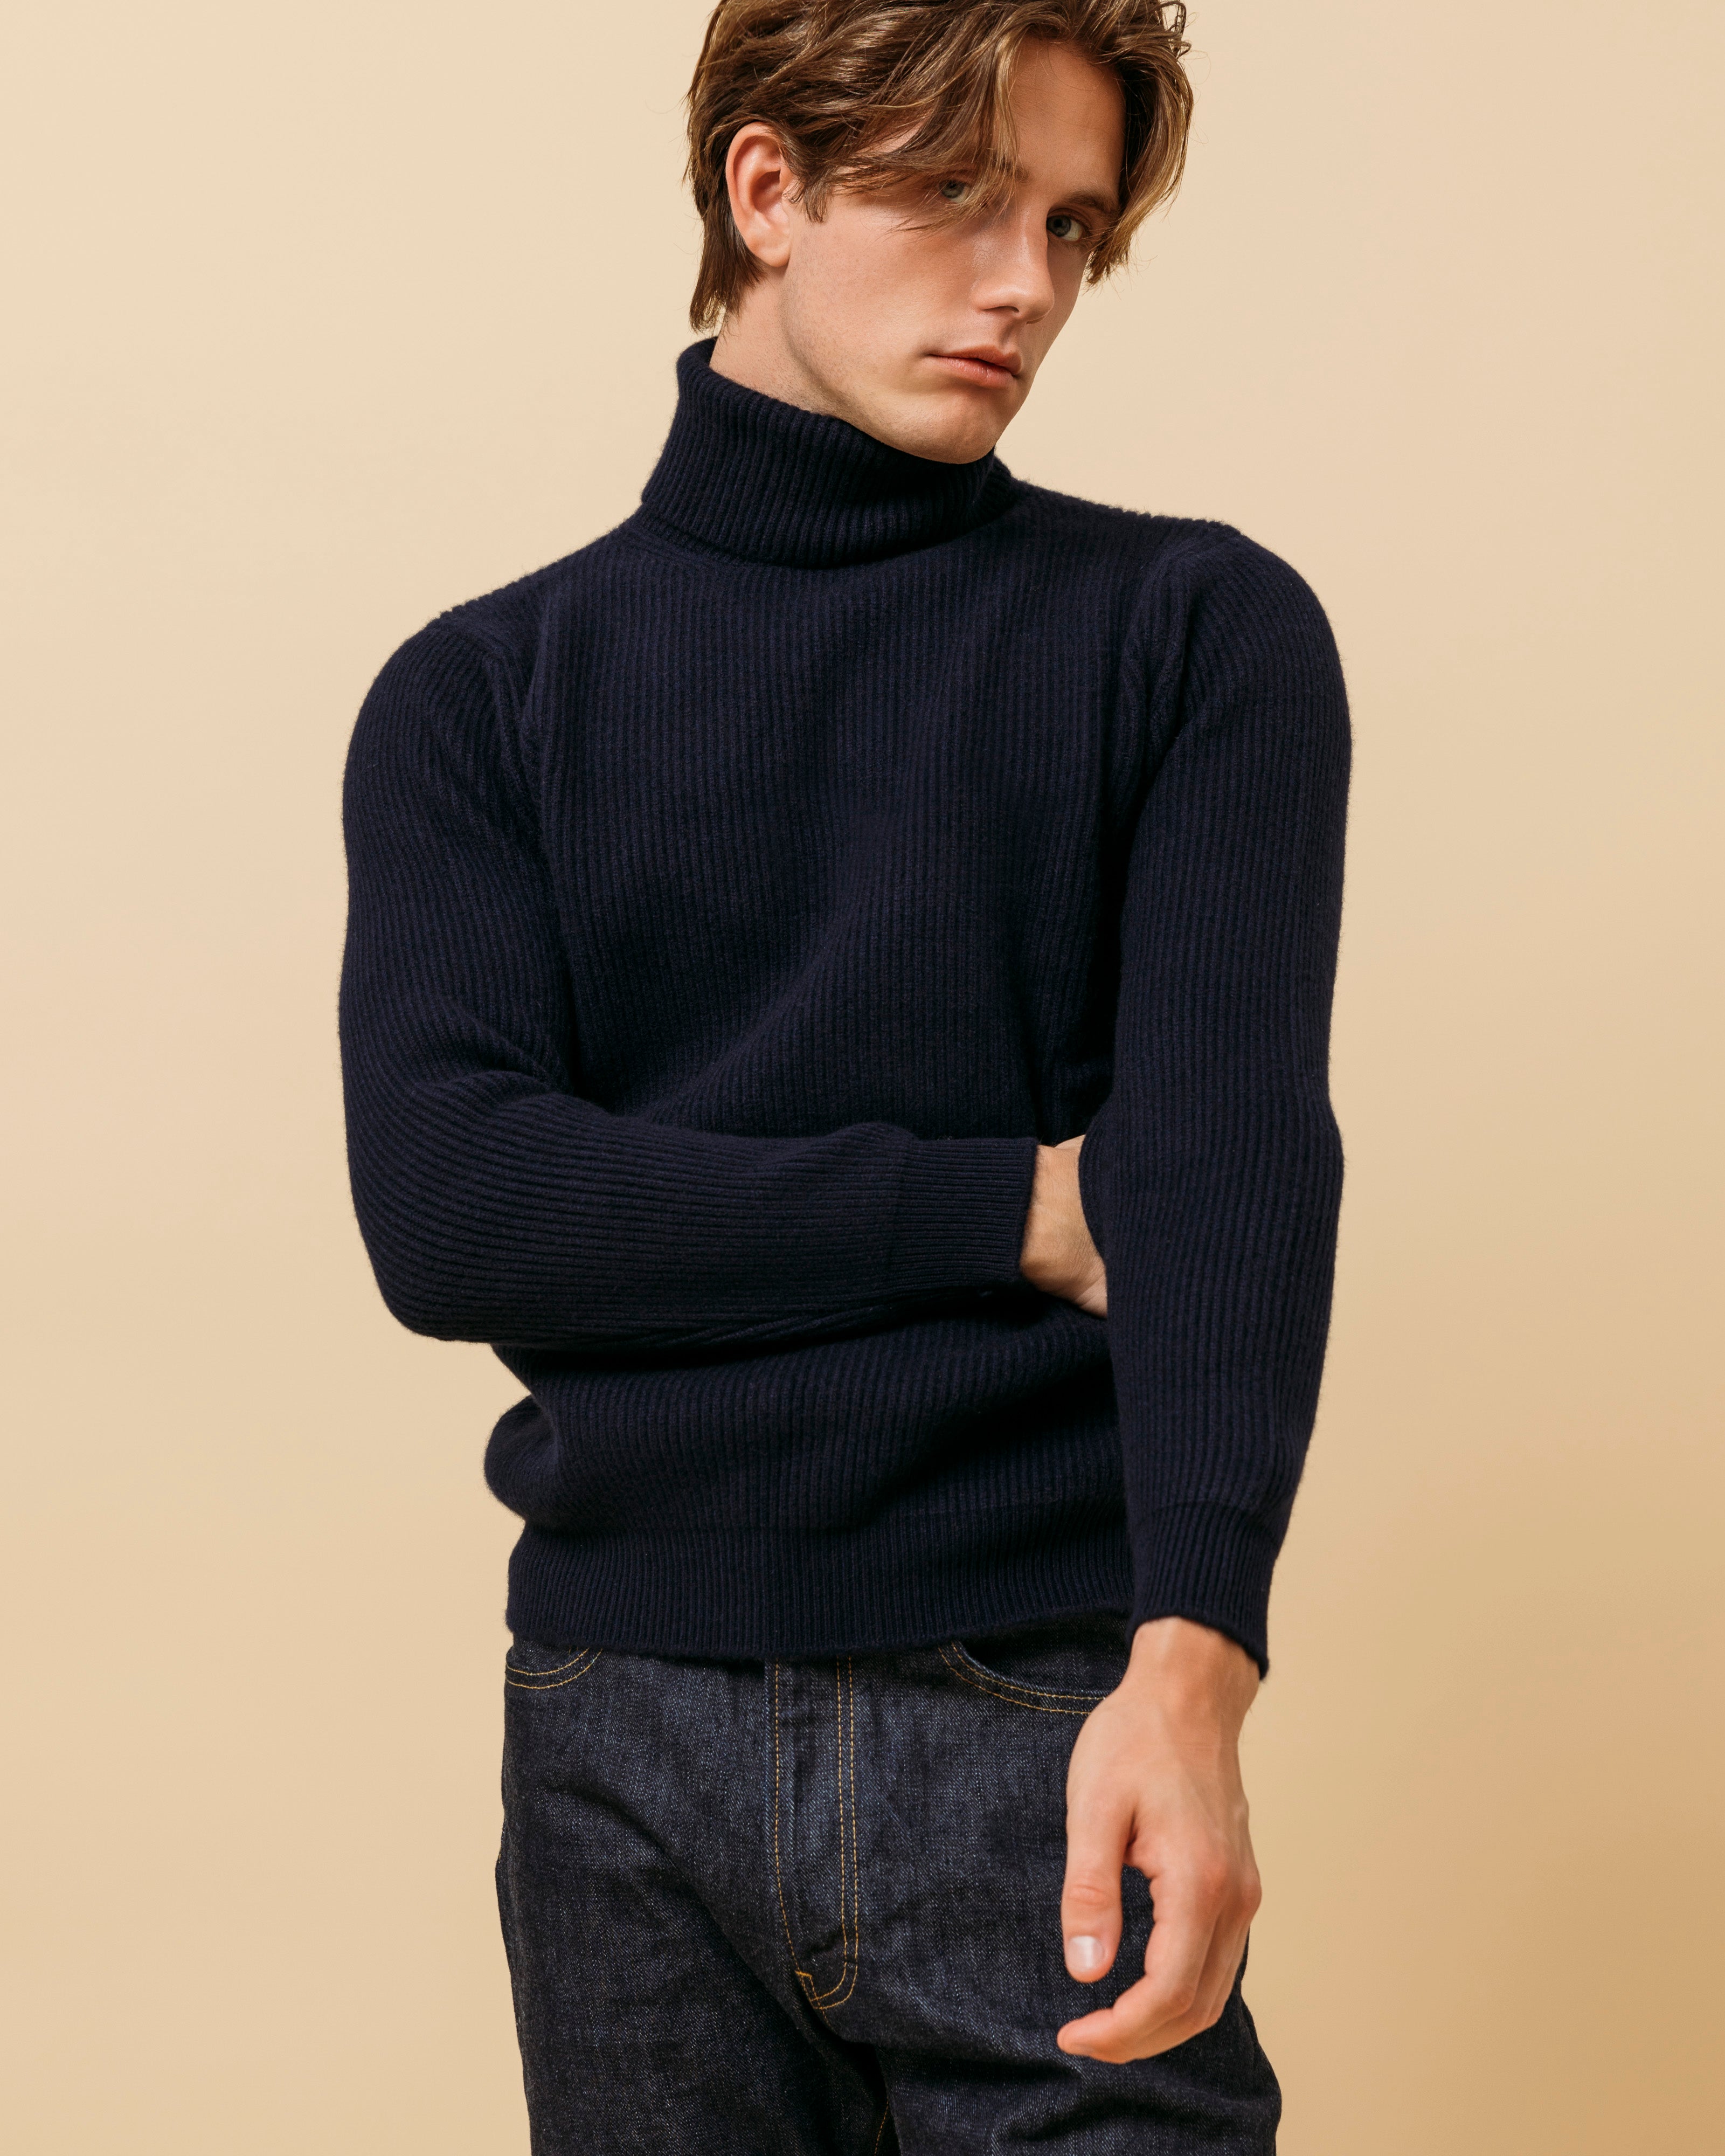 Cashmere ribbed submariner rollneck in navy – Colhay's